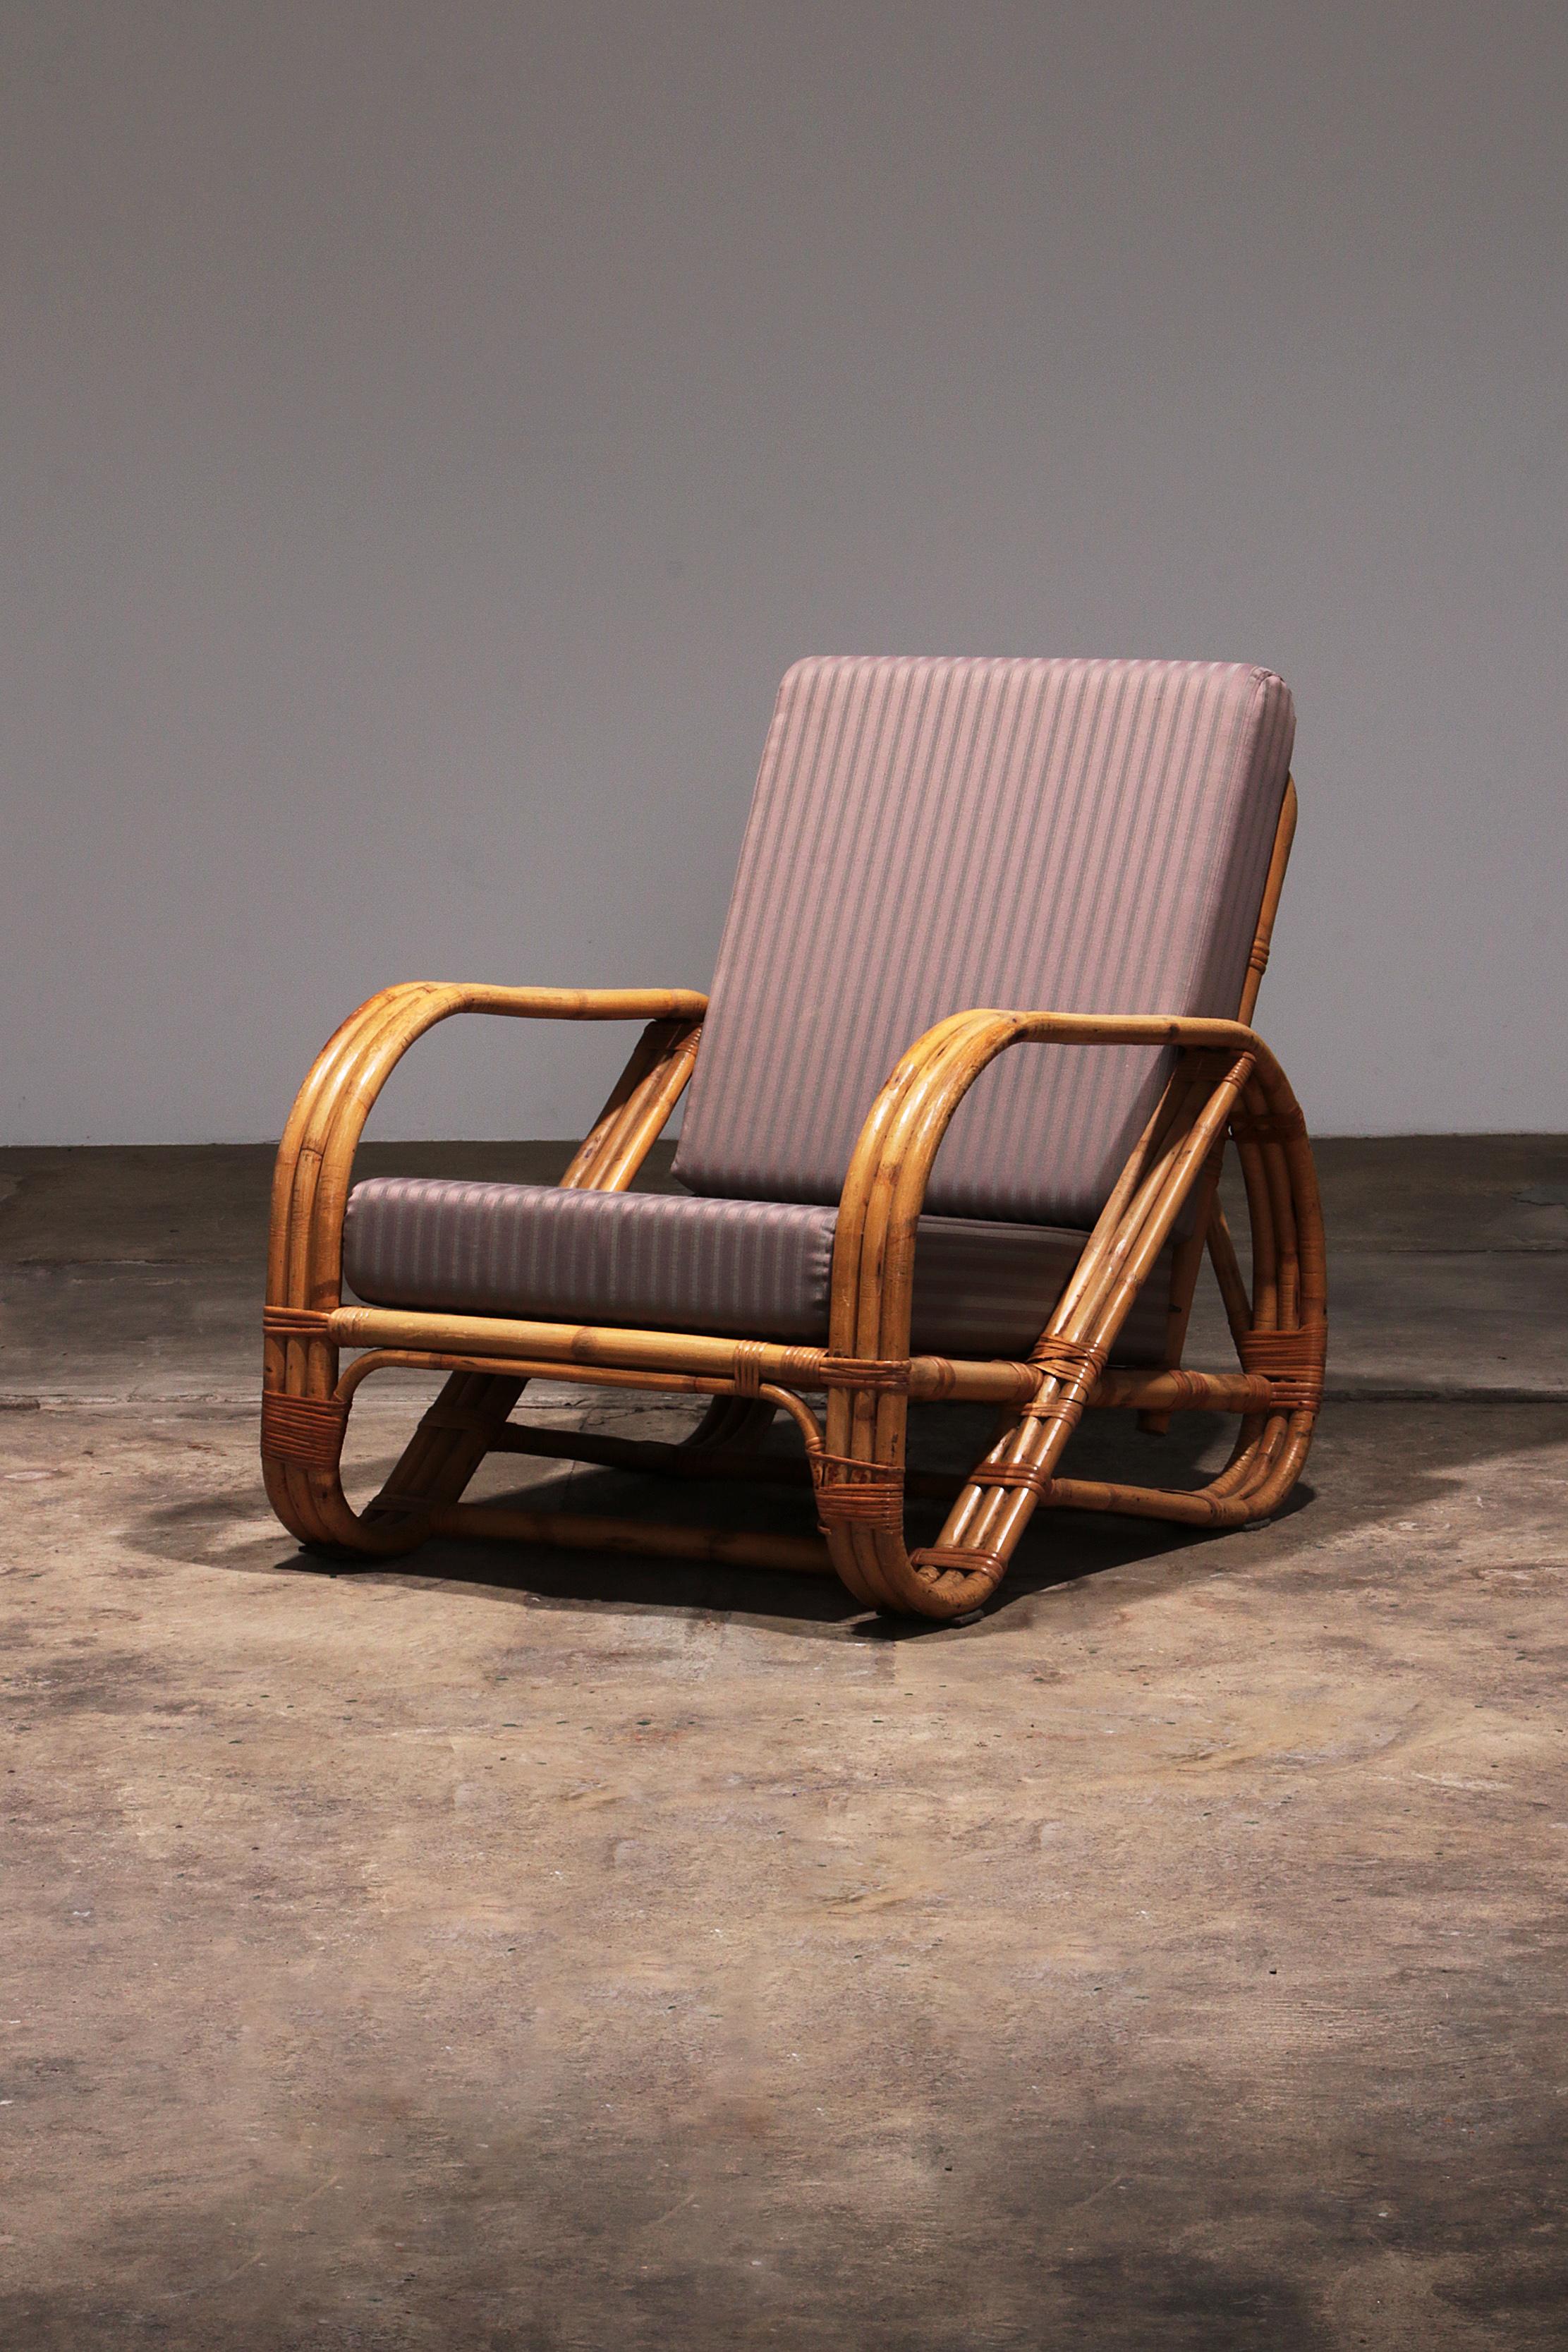 Vintage Rattan Bamboo Lounge Chair - Style Paul Frankl 1960

Do you also dream of sultry evenings under a tree, cozy in a bohemian atmosphere with a glass of wine in your hand? Then we have the perfect chair for you. Our vintage rattan bamboo lounge